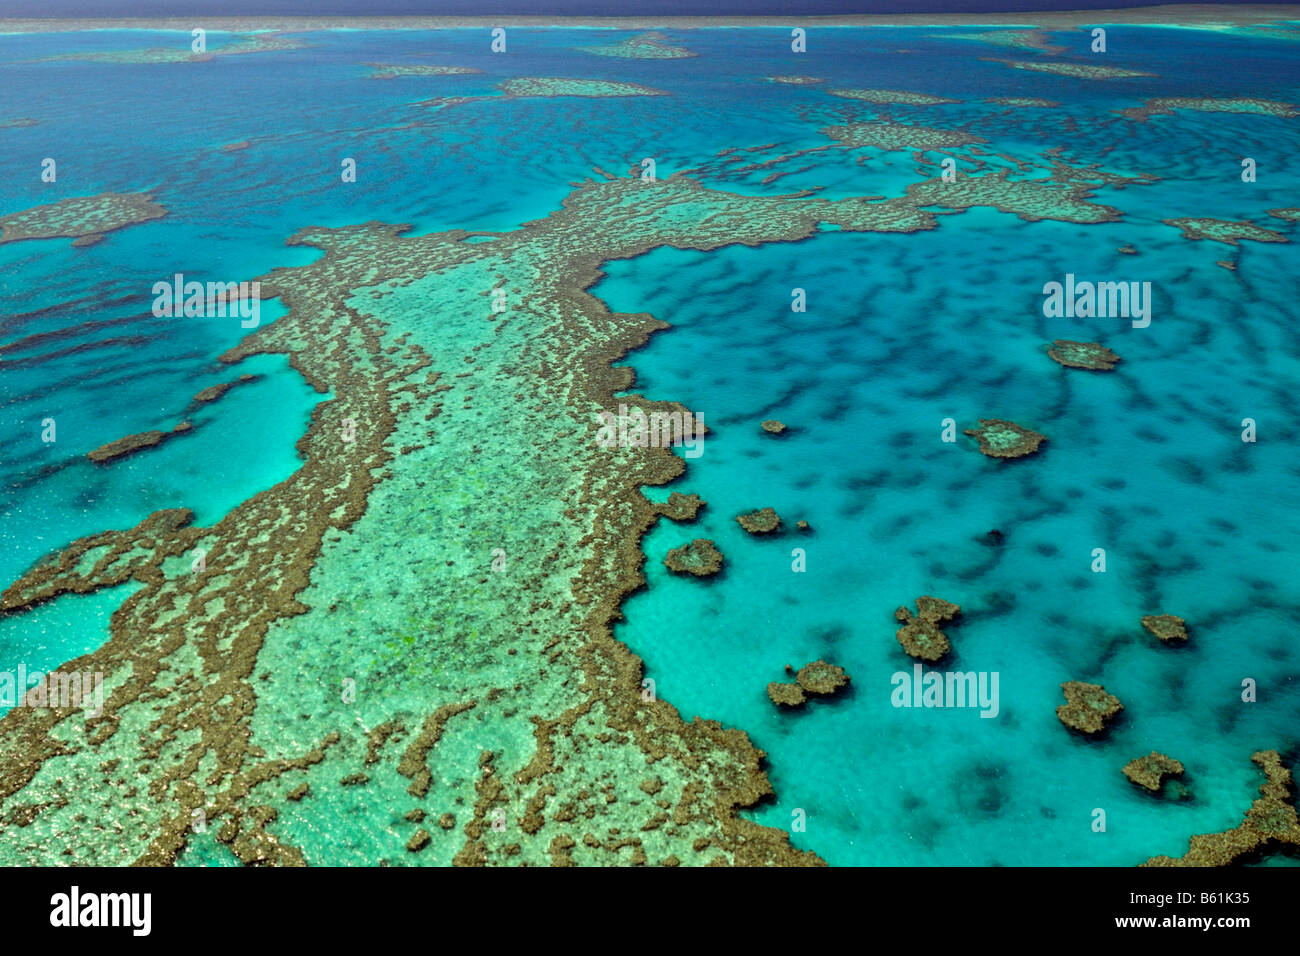 Reefs and atolls of the Great Barrier Reef, Australia Stock Photo